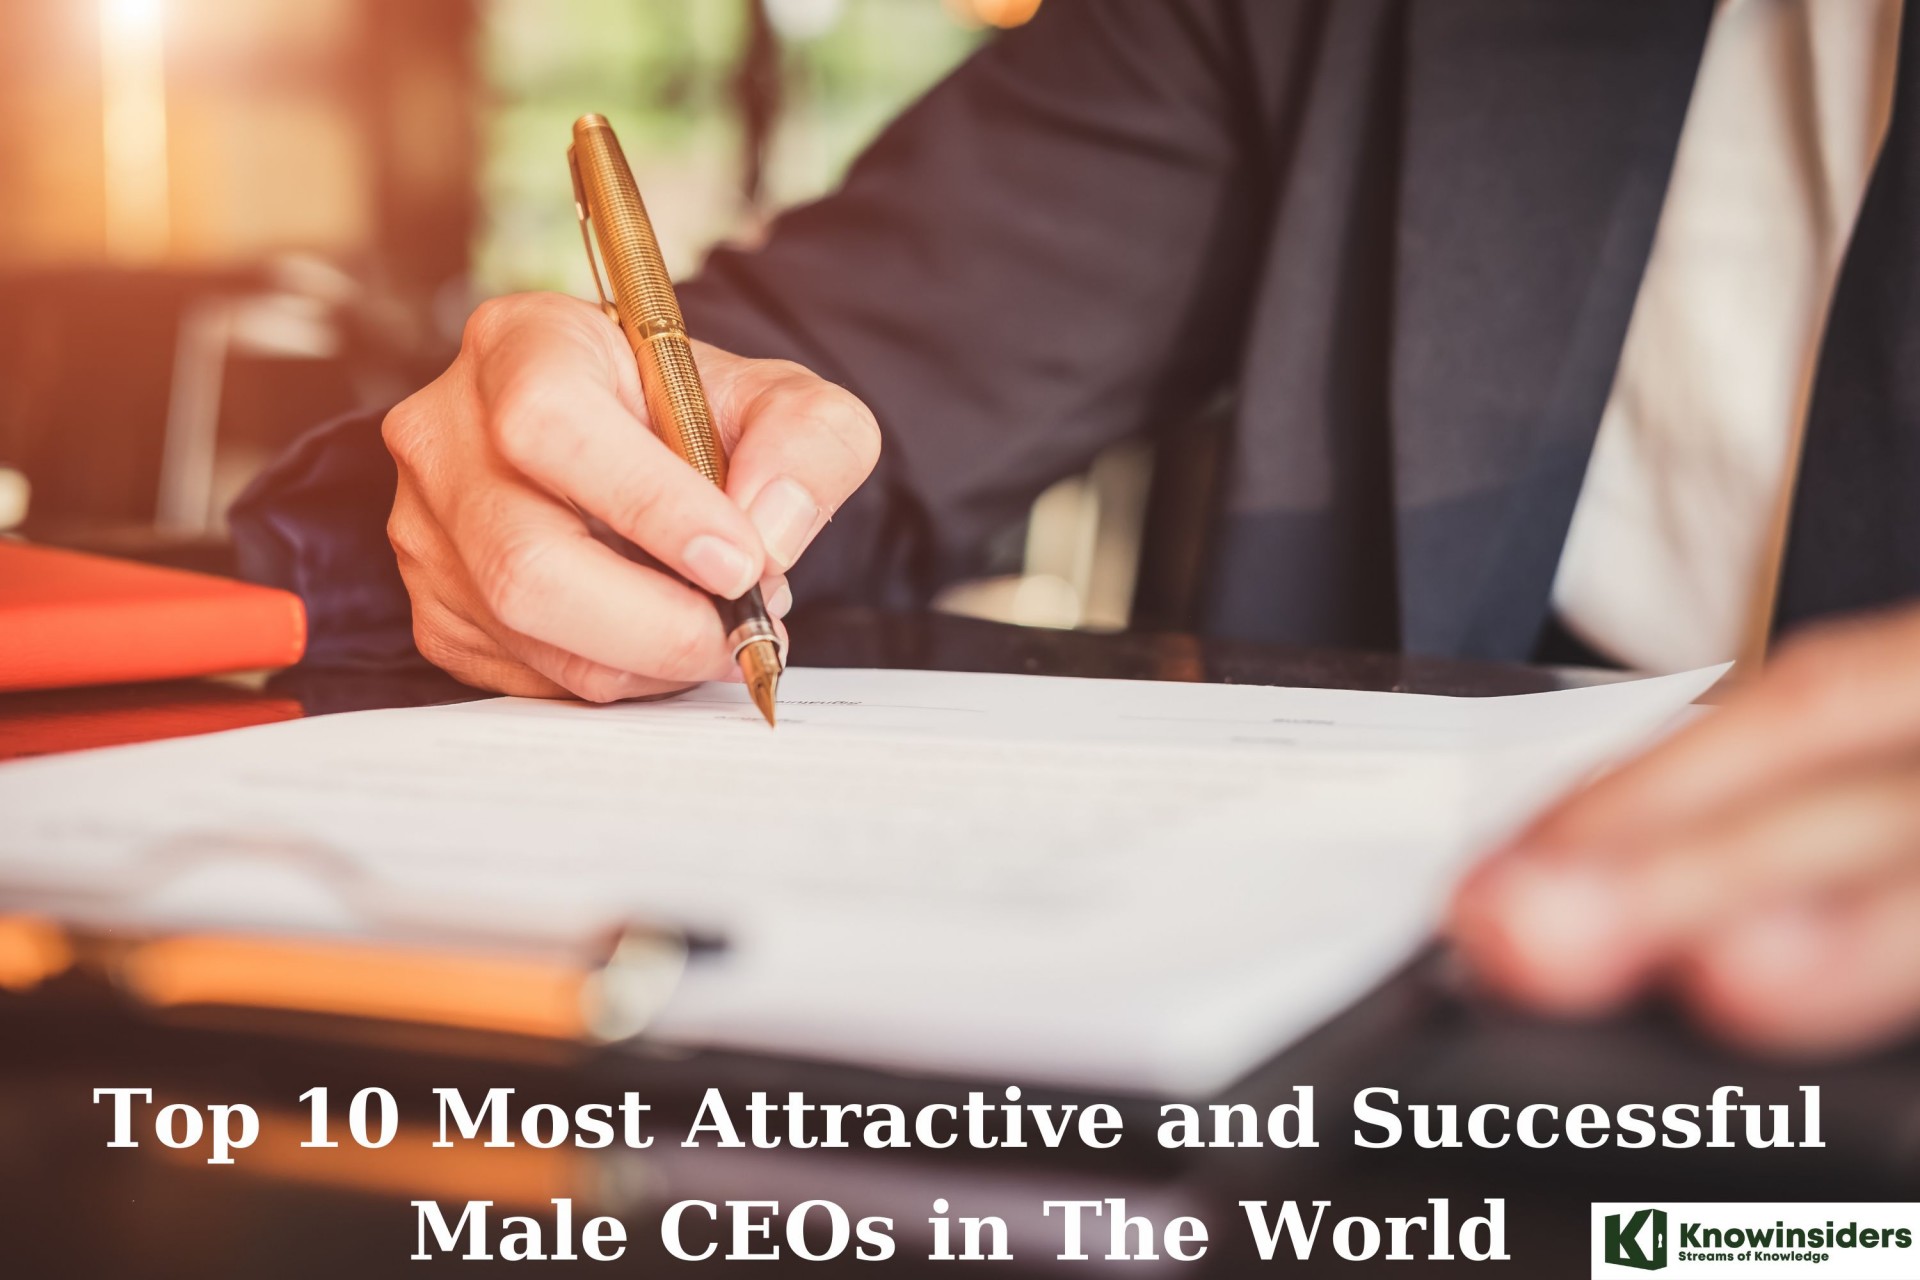 Top 10 Hottest Male CEOs in The World 2023/2024